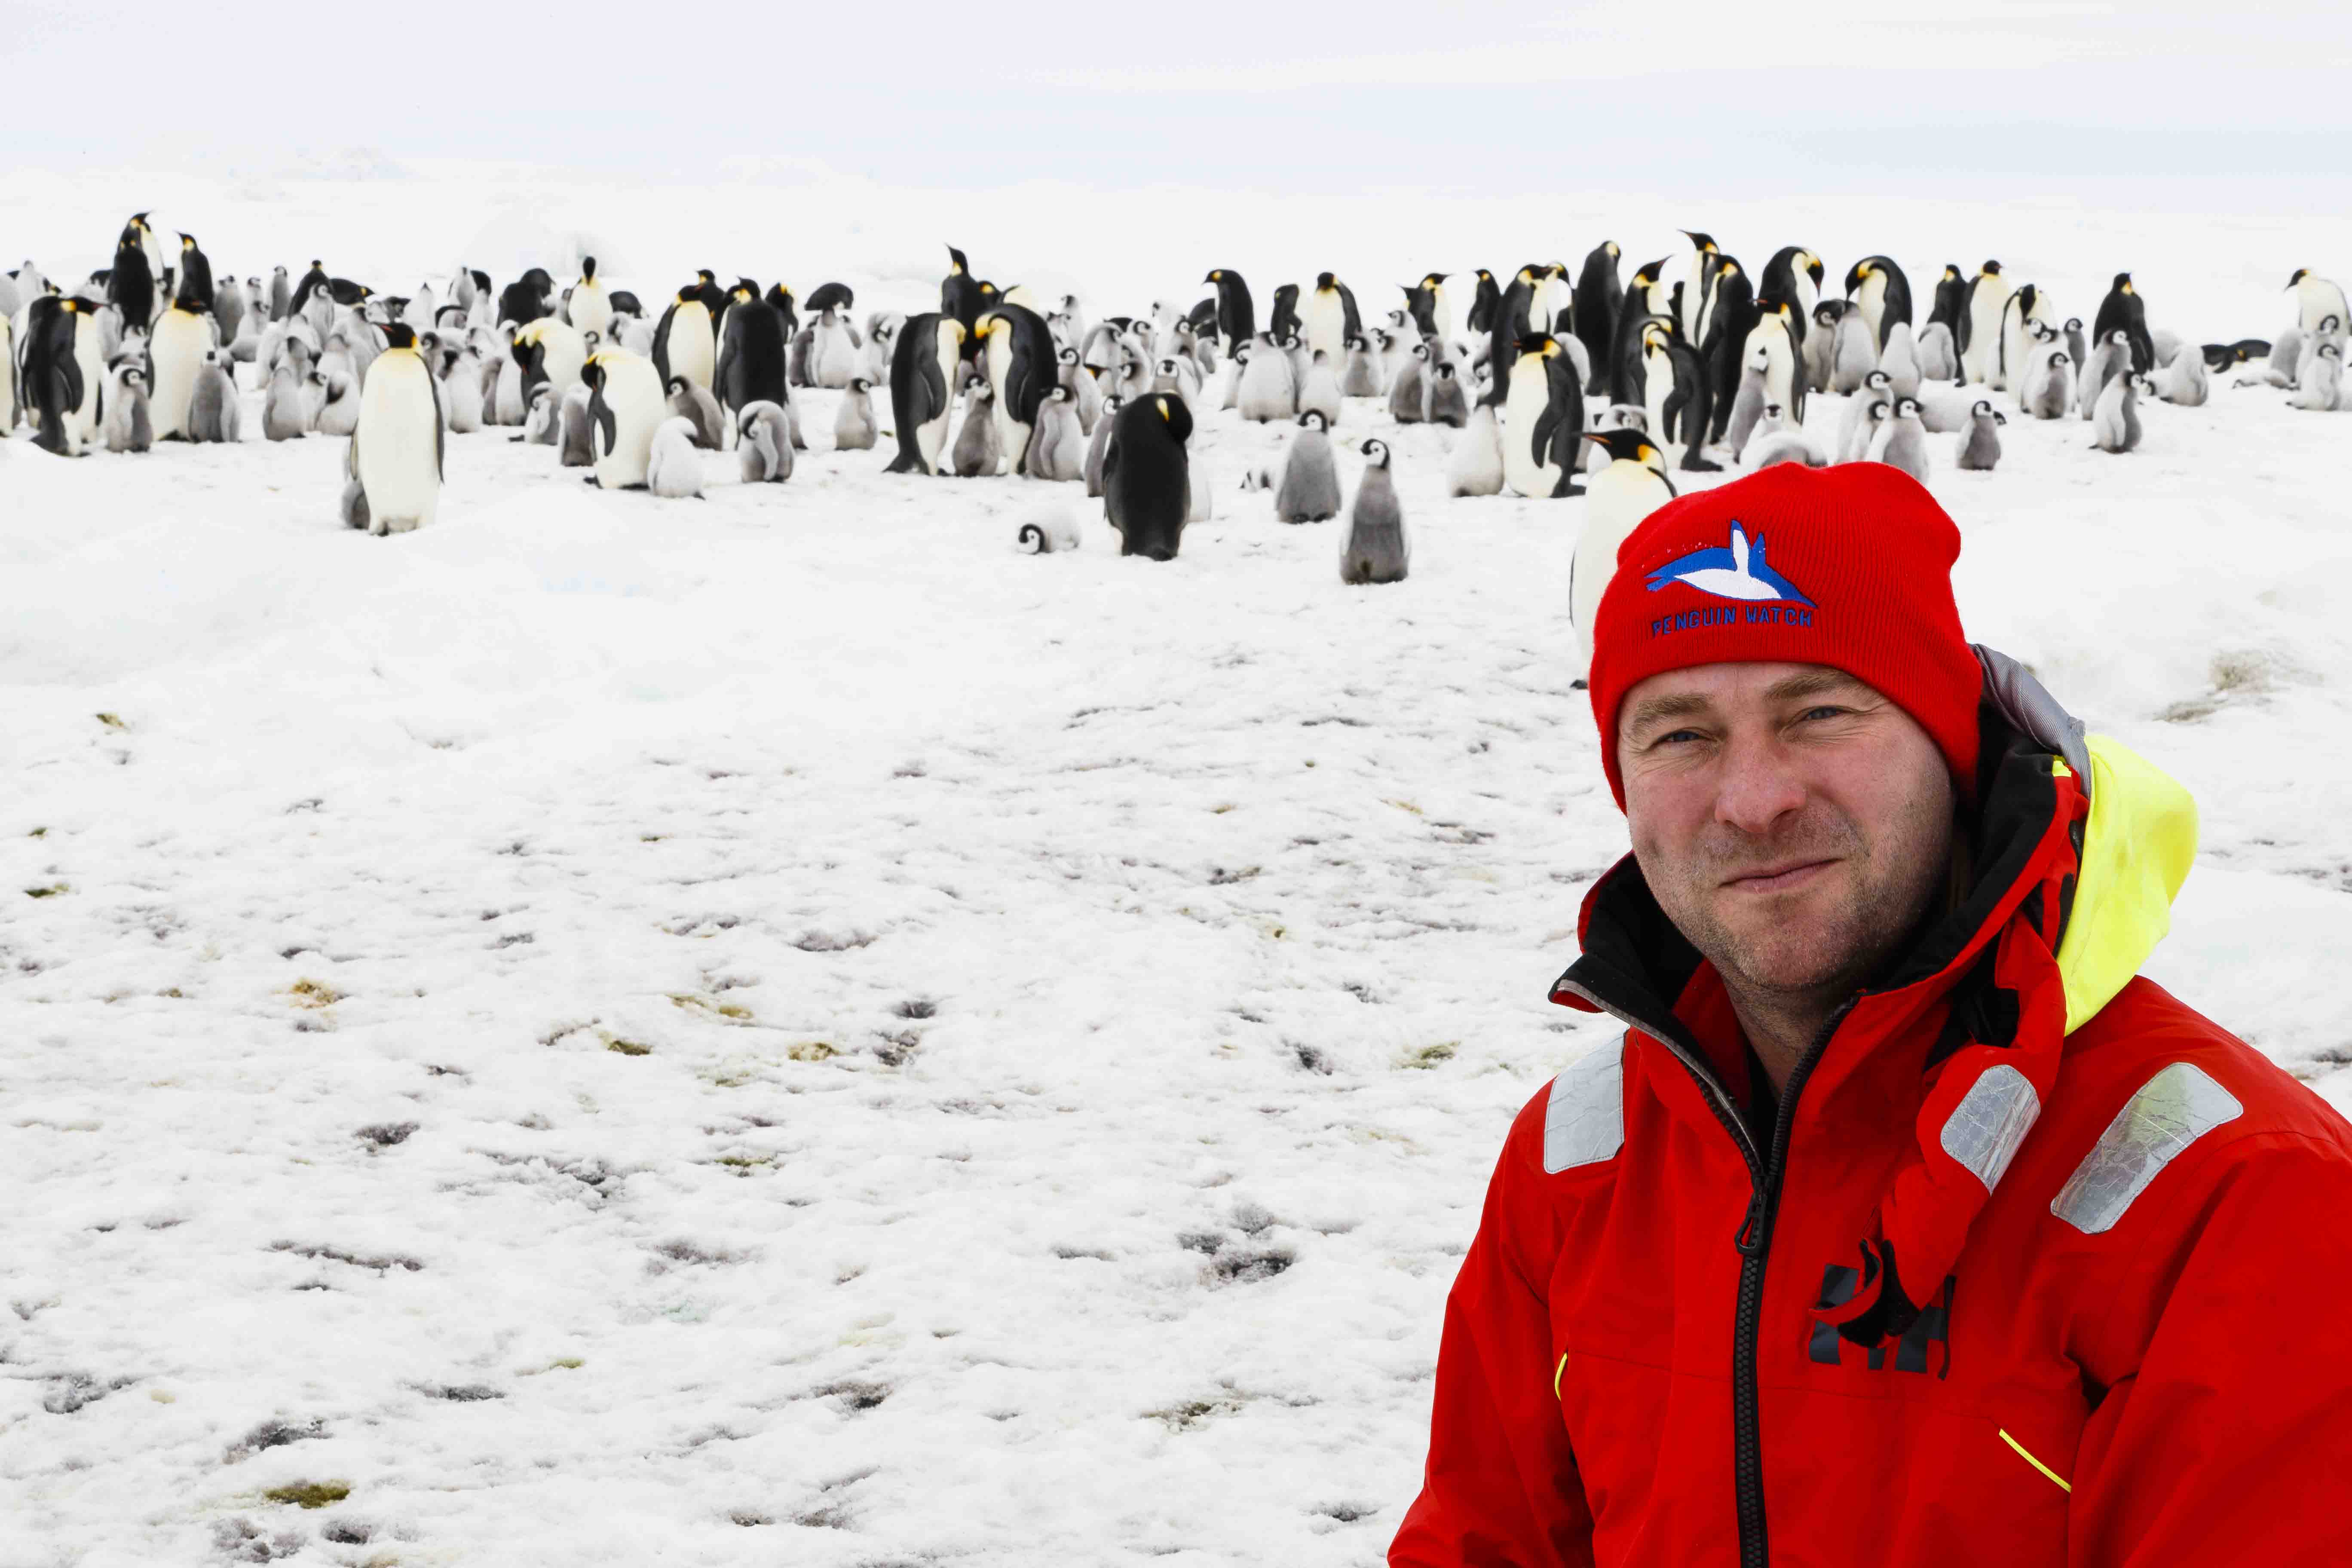 Headshot of lead penguinologist Dr. Tom Hart, from Penguin Watch. Emperor penguins can be seen in the background